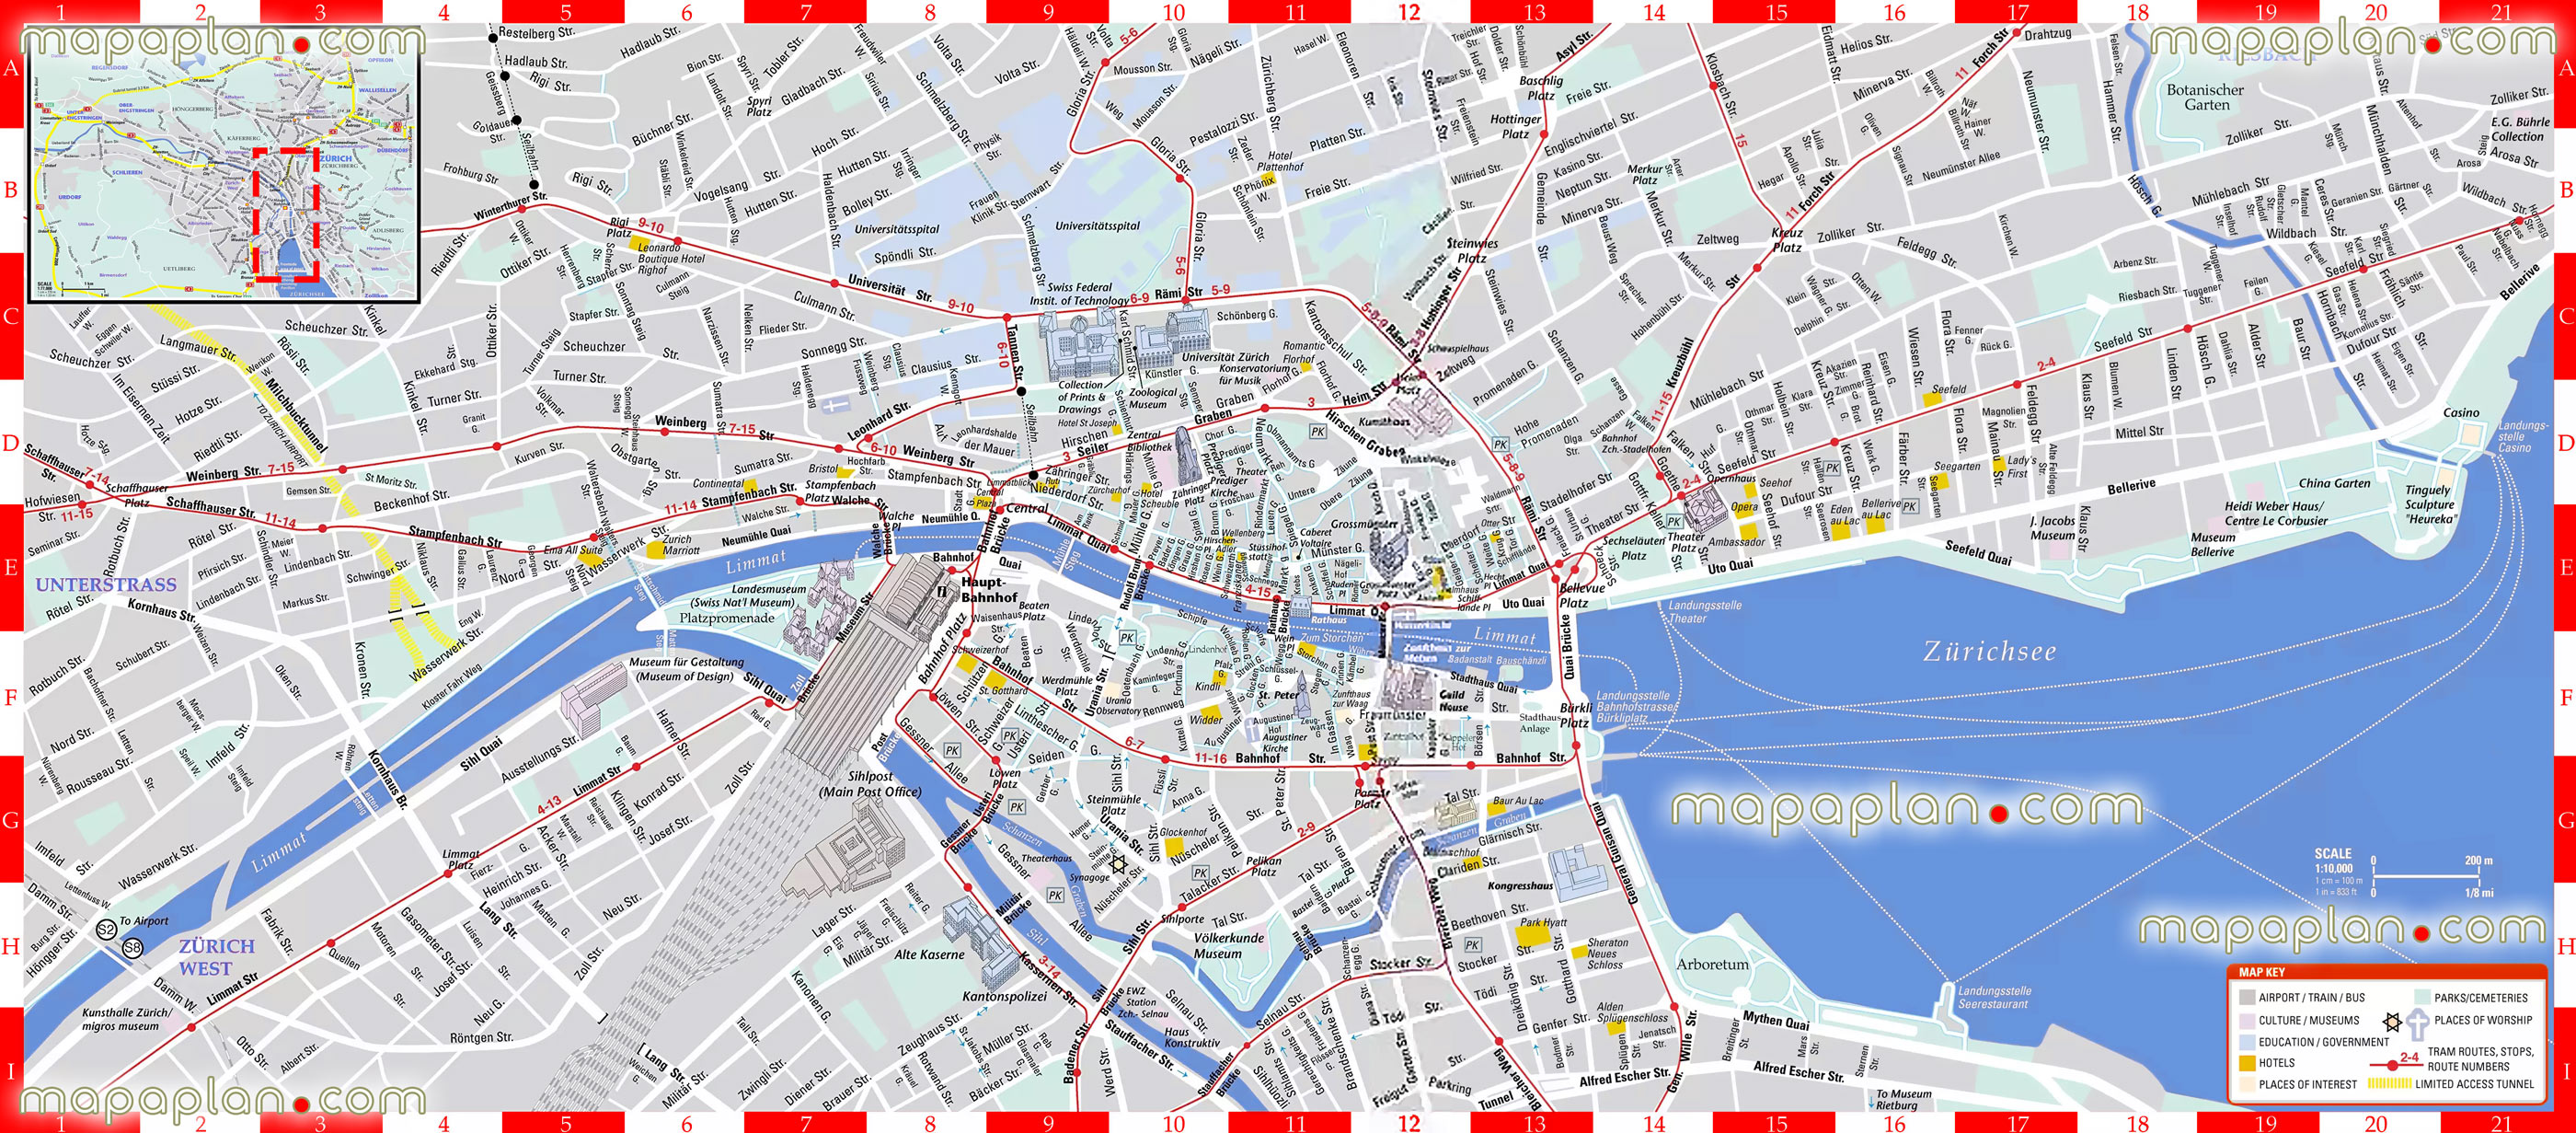 Zurich switzerland city center free printable interactive visitors detailed guide download tourists public transport stations tram stops plan inner city old town must see sights sightseeing places interest street namess Zurich Top tourist attractions map